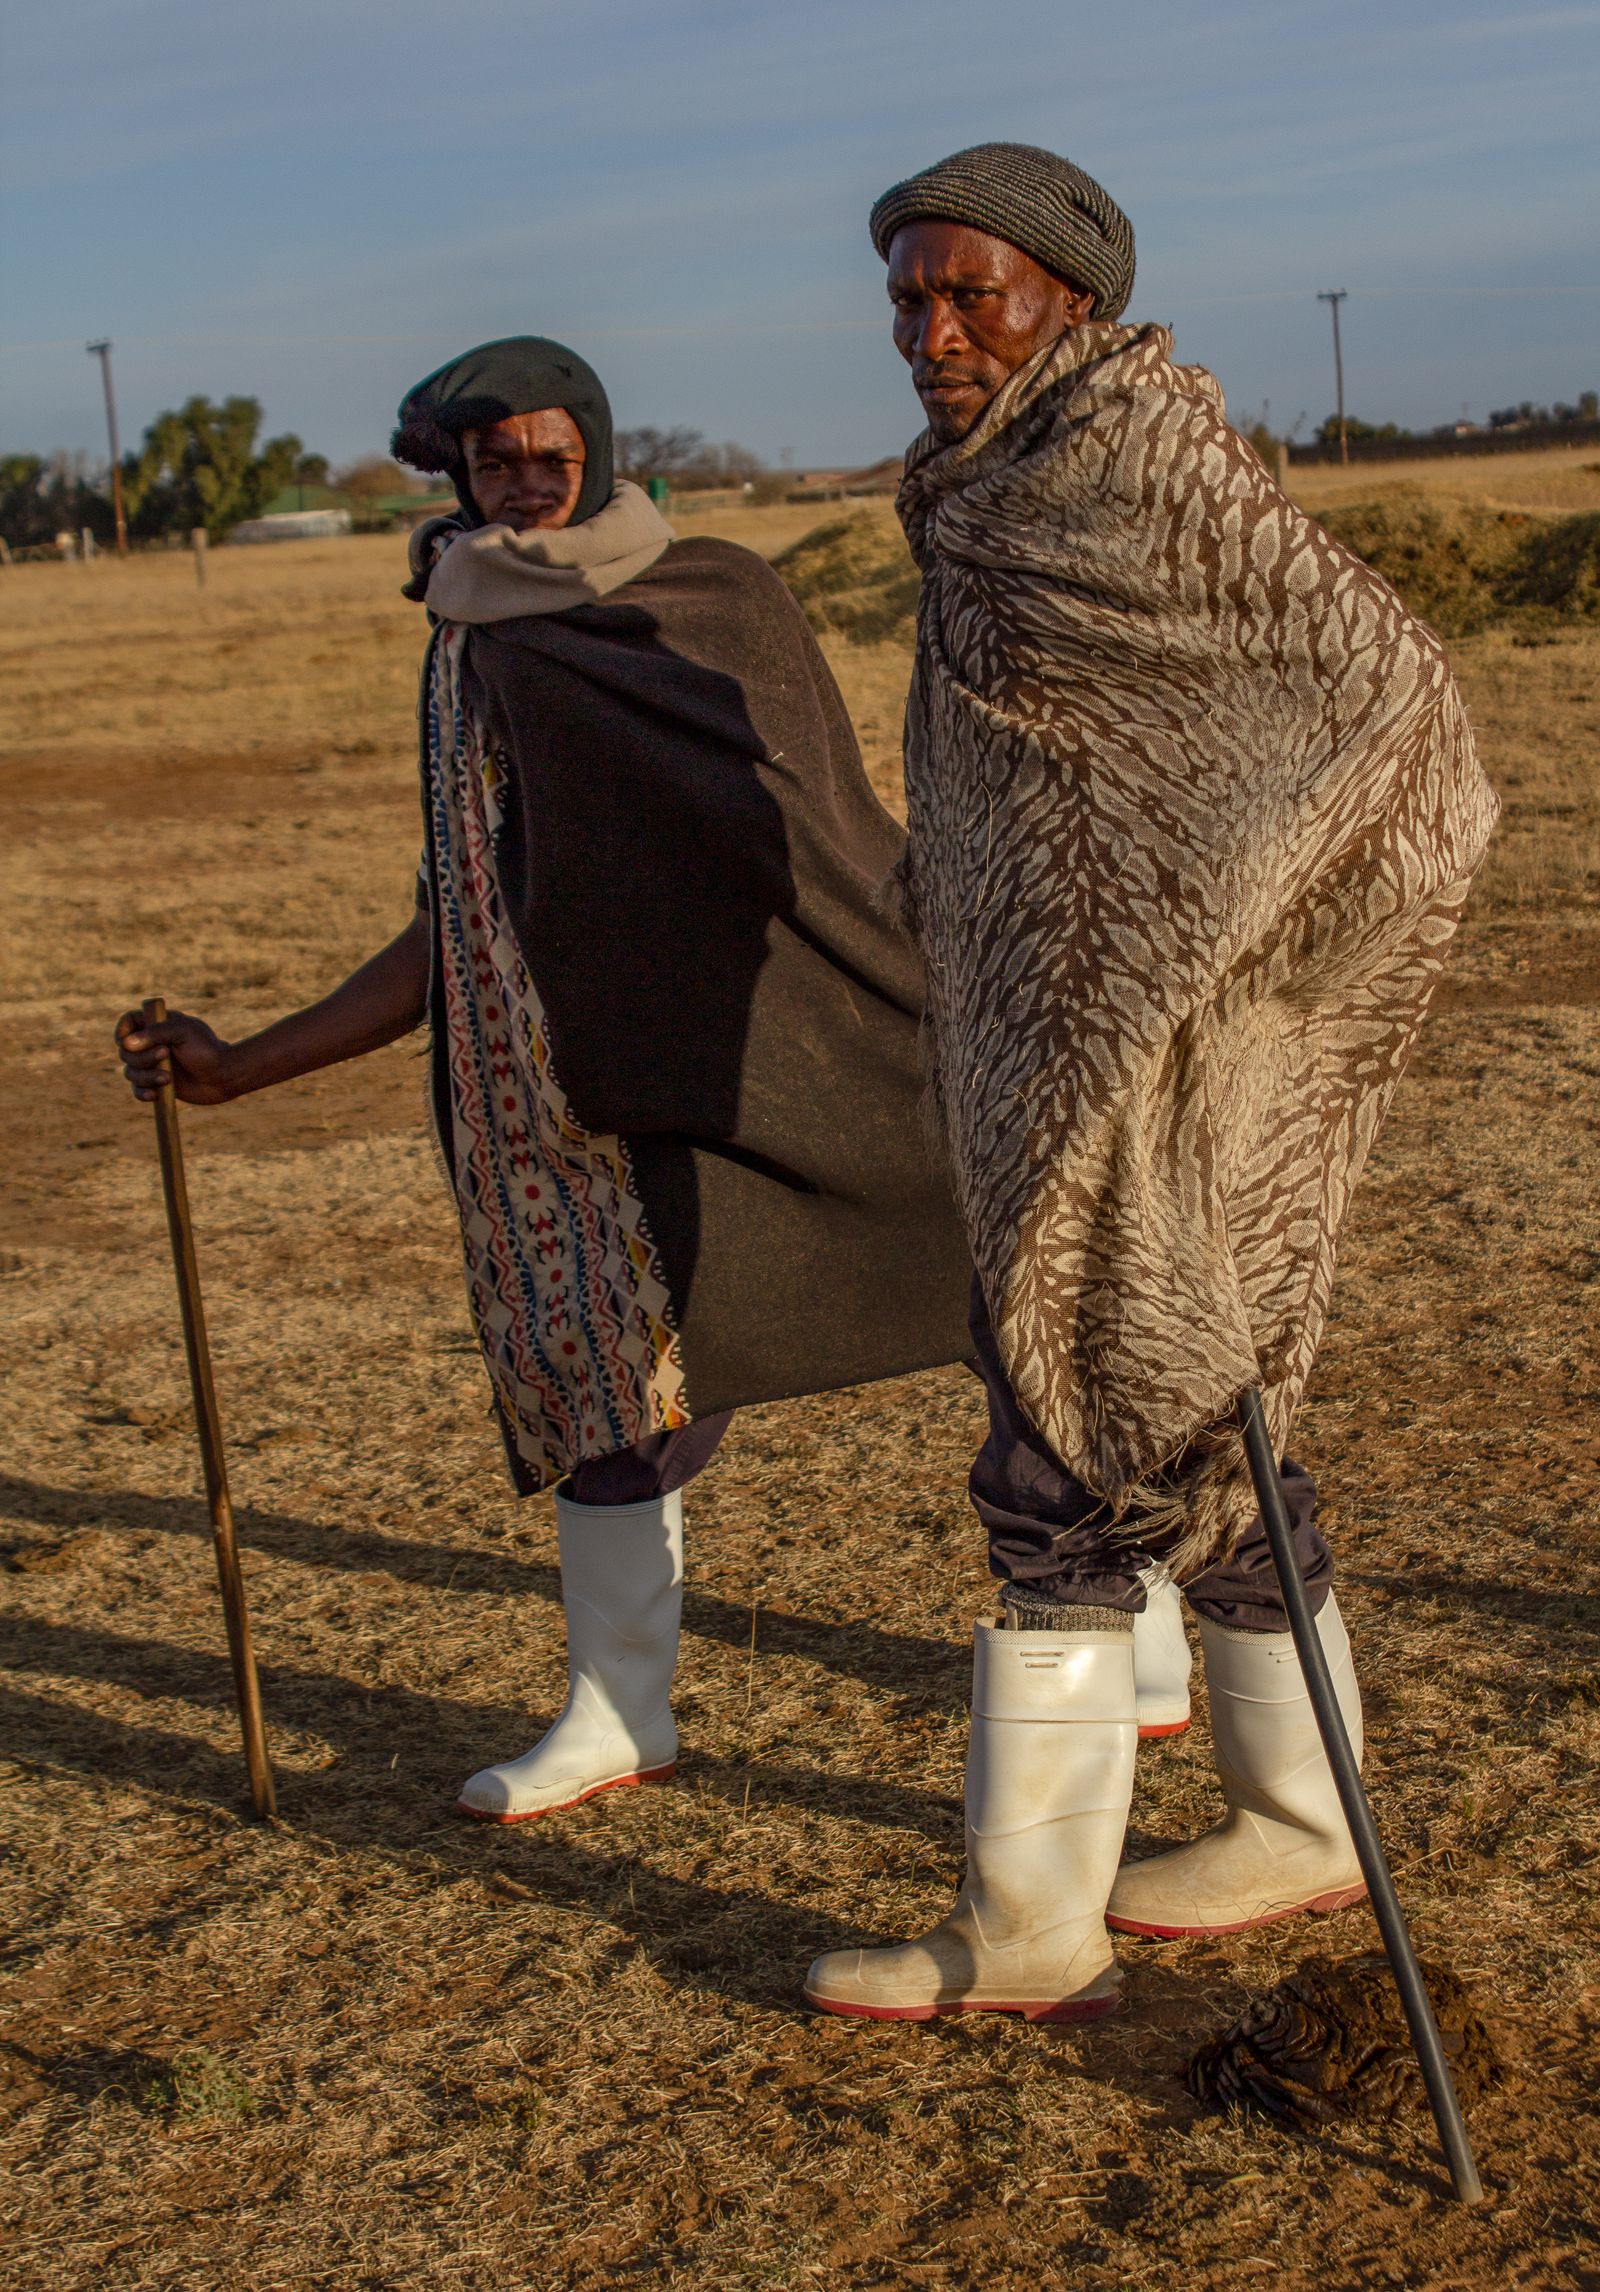 Two men dressed in warm blankets, gumboots, and balaclava, carrying staffs